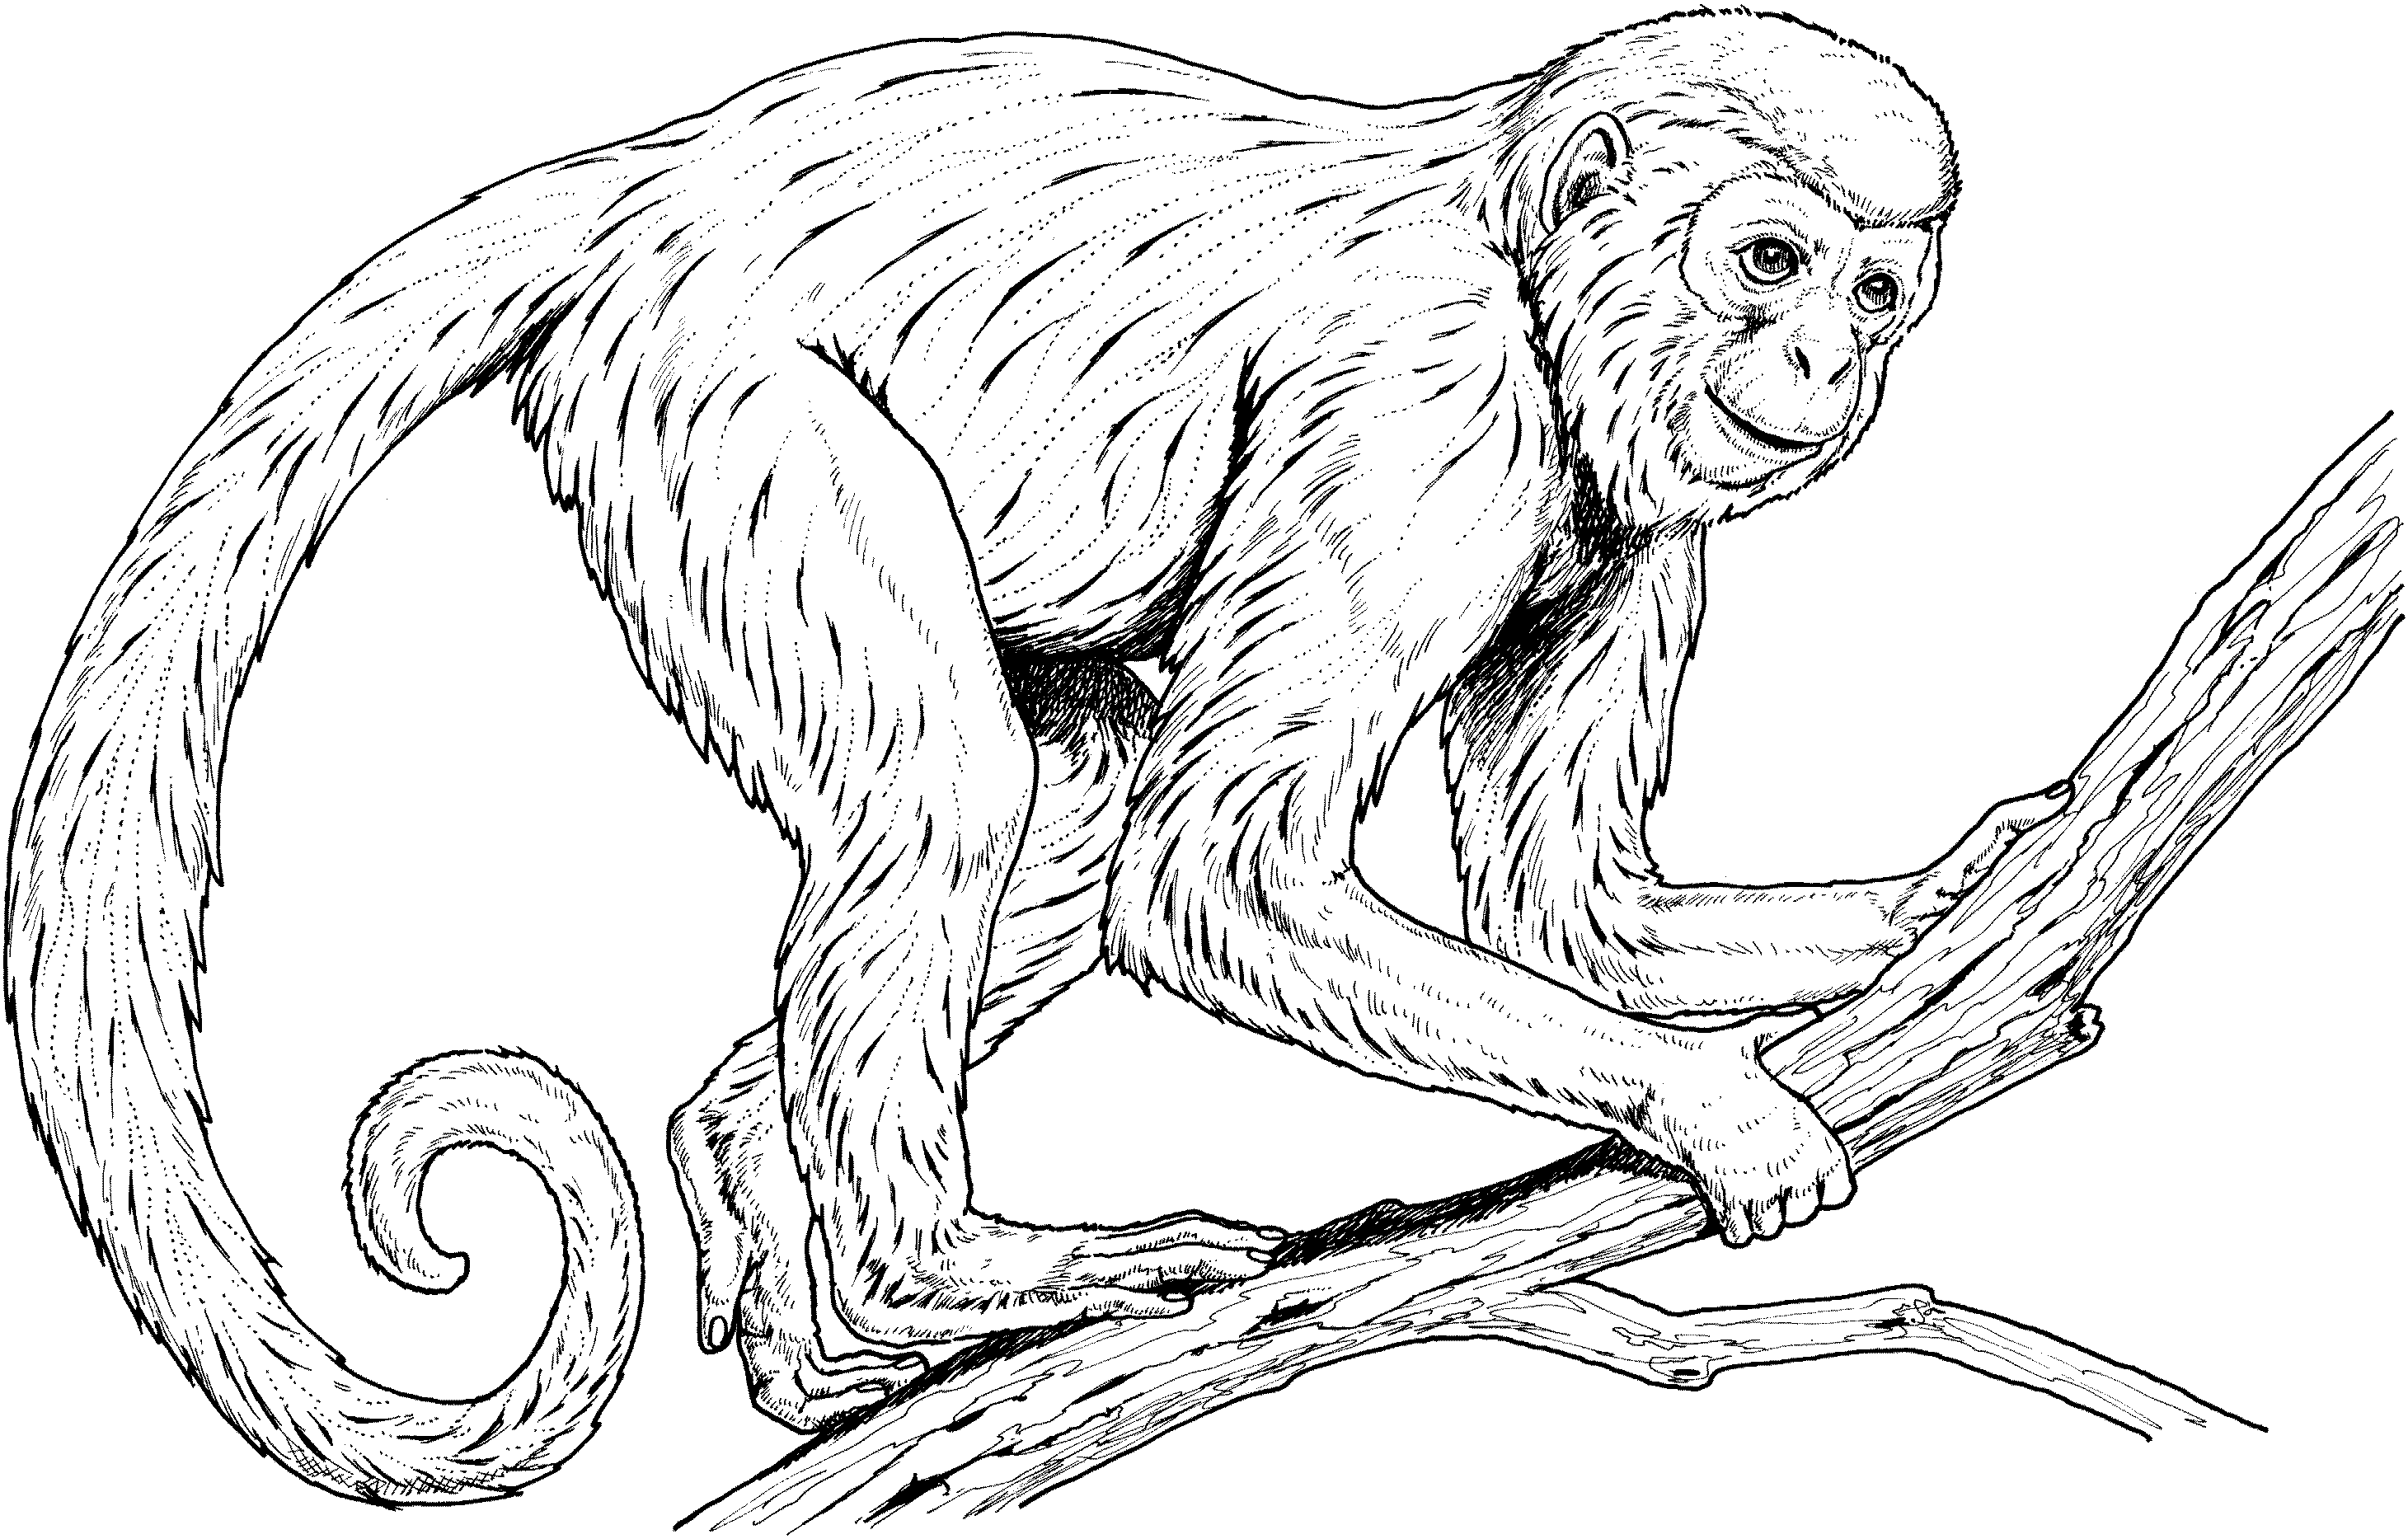 Coloring Pages Of Monkeys In Trees - High Quality Coloring Pages